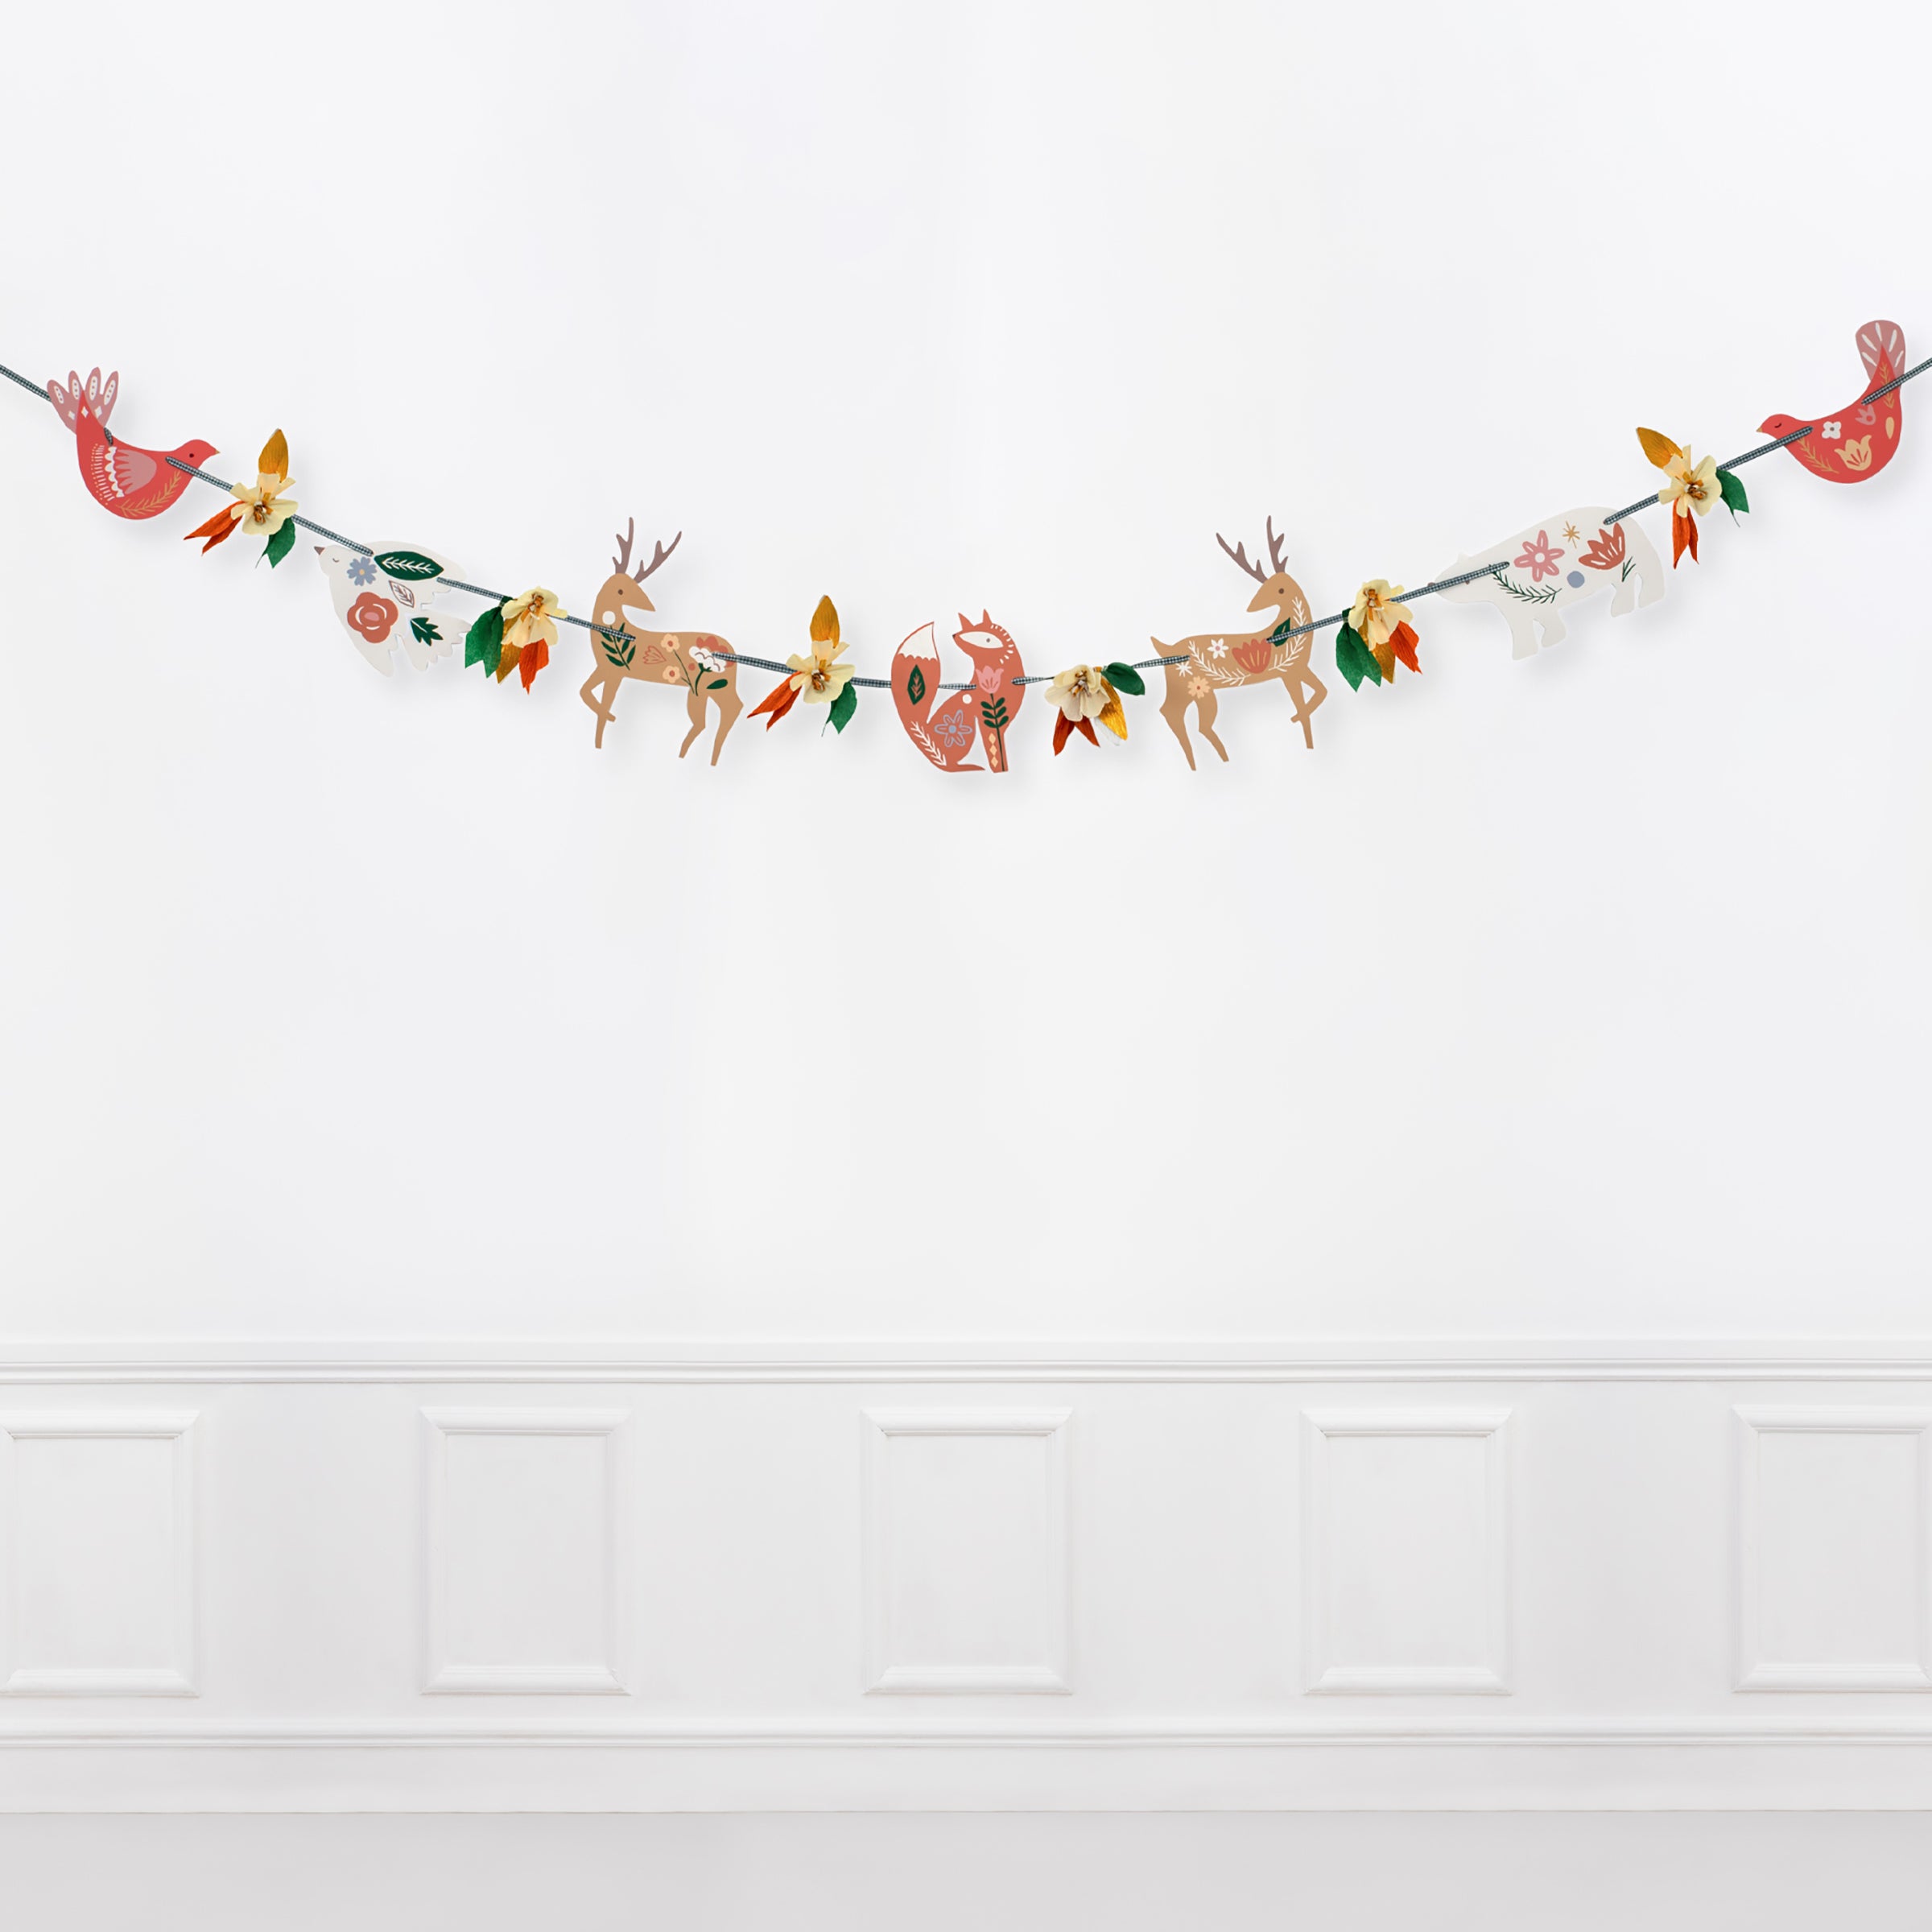 This beautiful Thankgiving garland is made from crepe paper decorations including flowers and leaves.